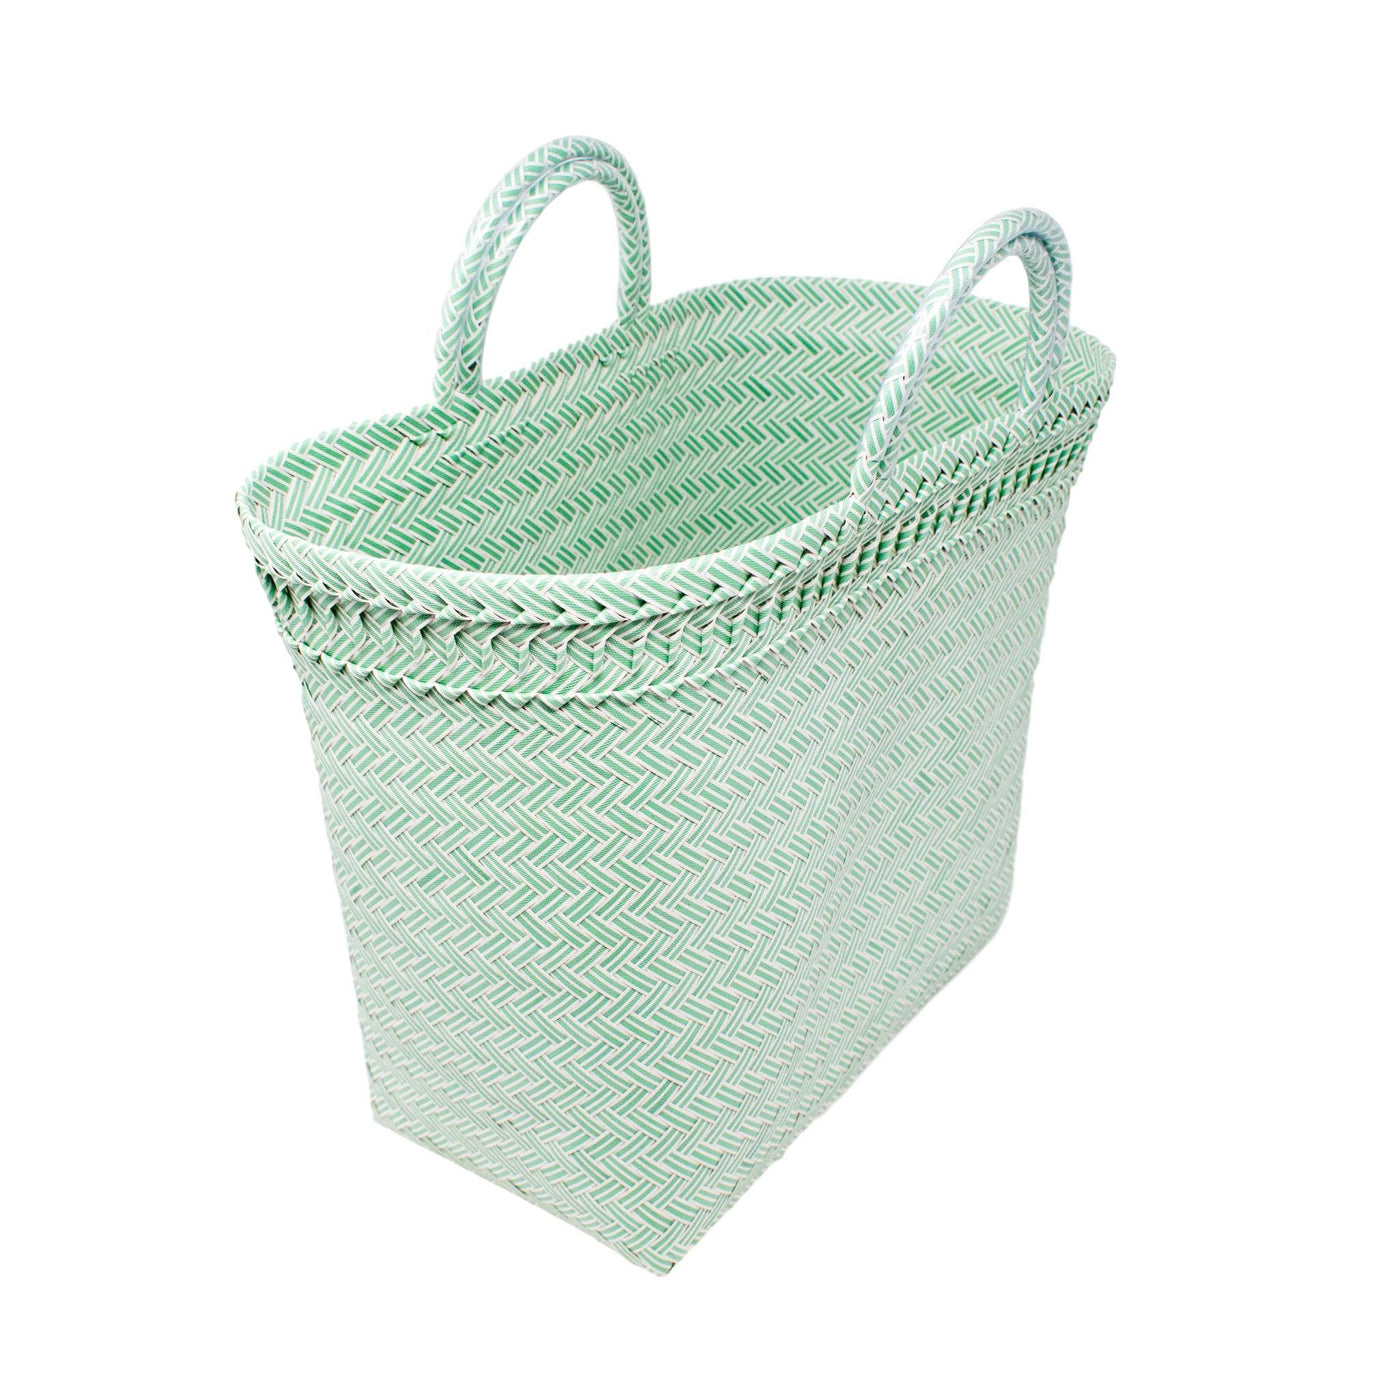 MAISY TOTE - GREEN by POPPY + SAGE